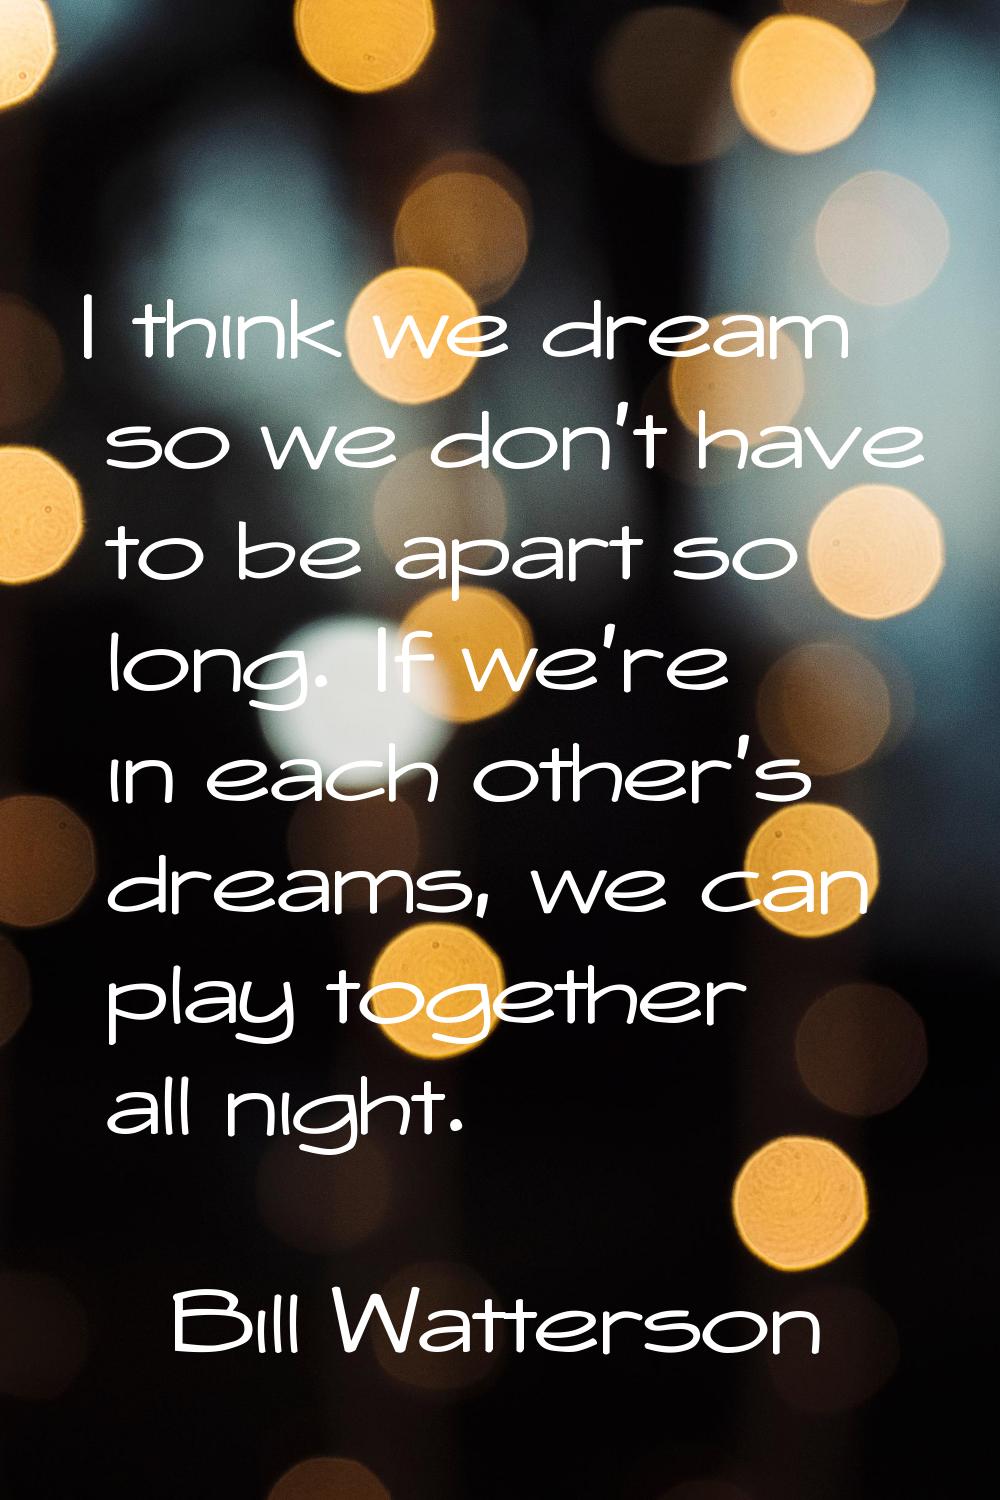 I think we dream so we don't have to be apart so long. If we're in each other's dreams, we can play